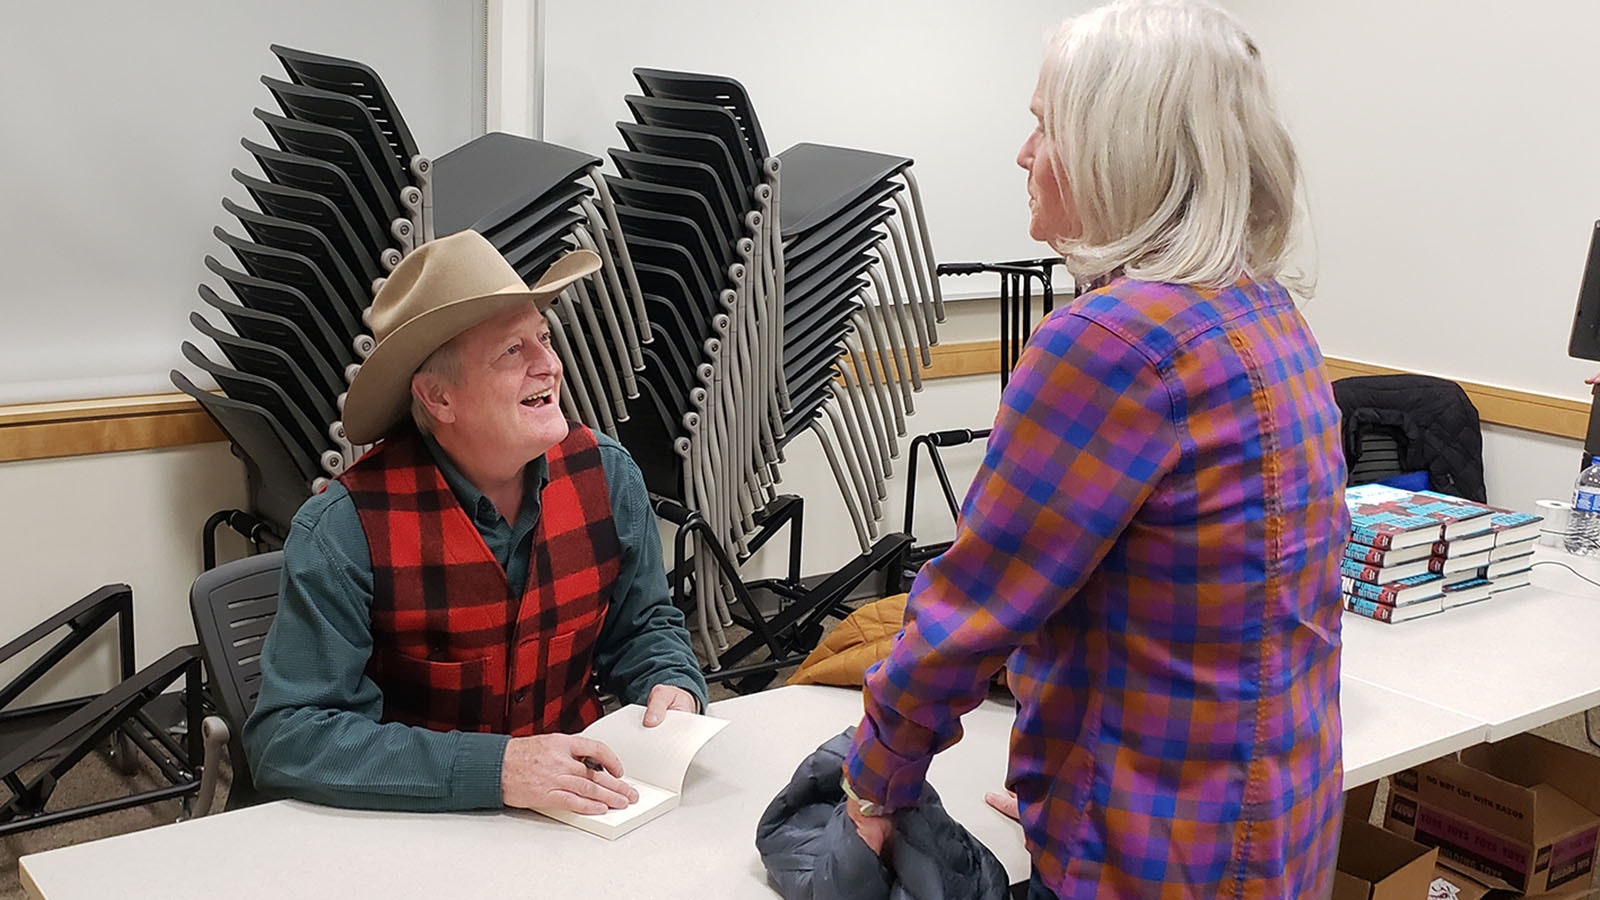 Craig Johnson has a laugh and a smile for everyone waiting in line to have a book signed. He takes his time with each one, telling jokes and stories until they're smiling right along with him.